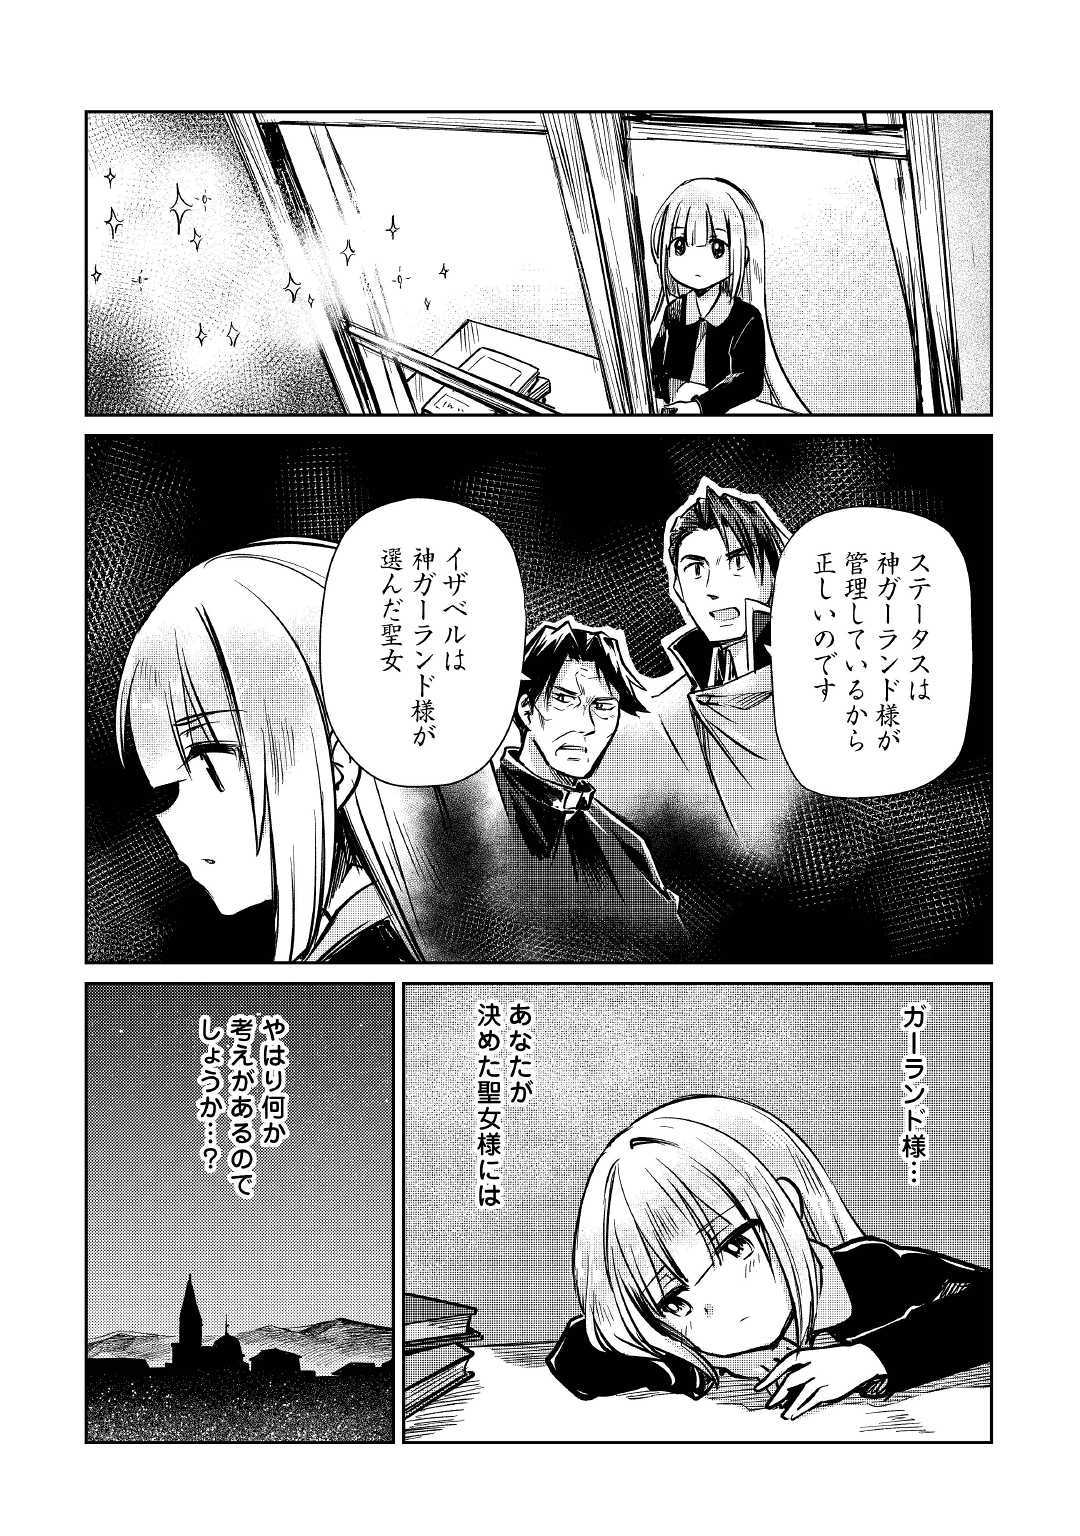 The Former Structural Researcher’s Story of Otherworldly Adventure 第10話 - Page 17